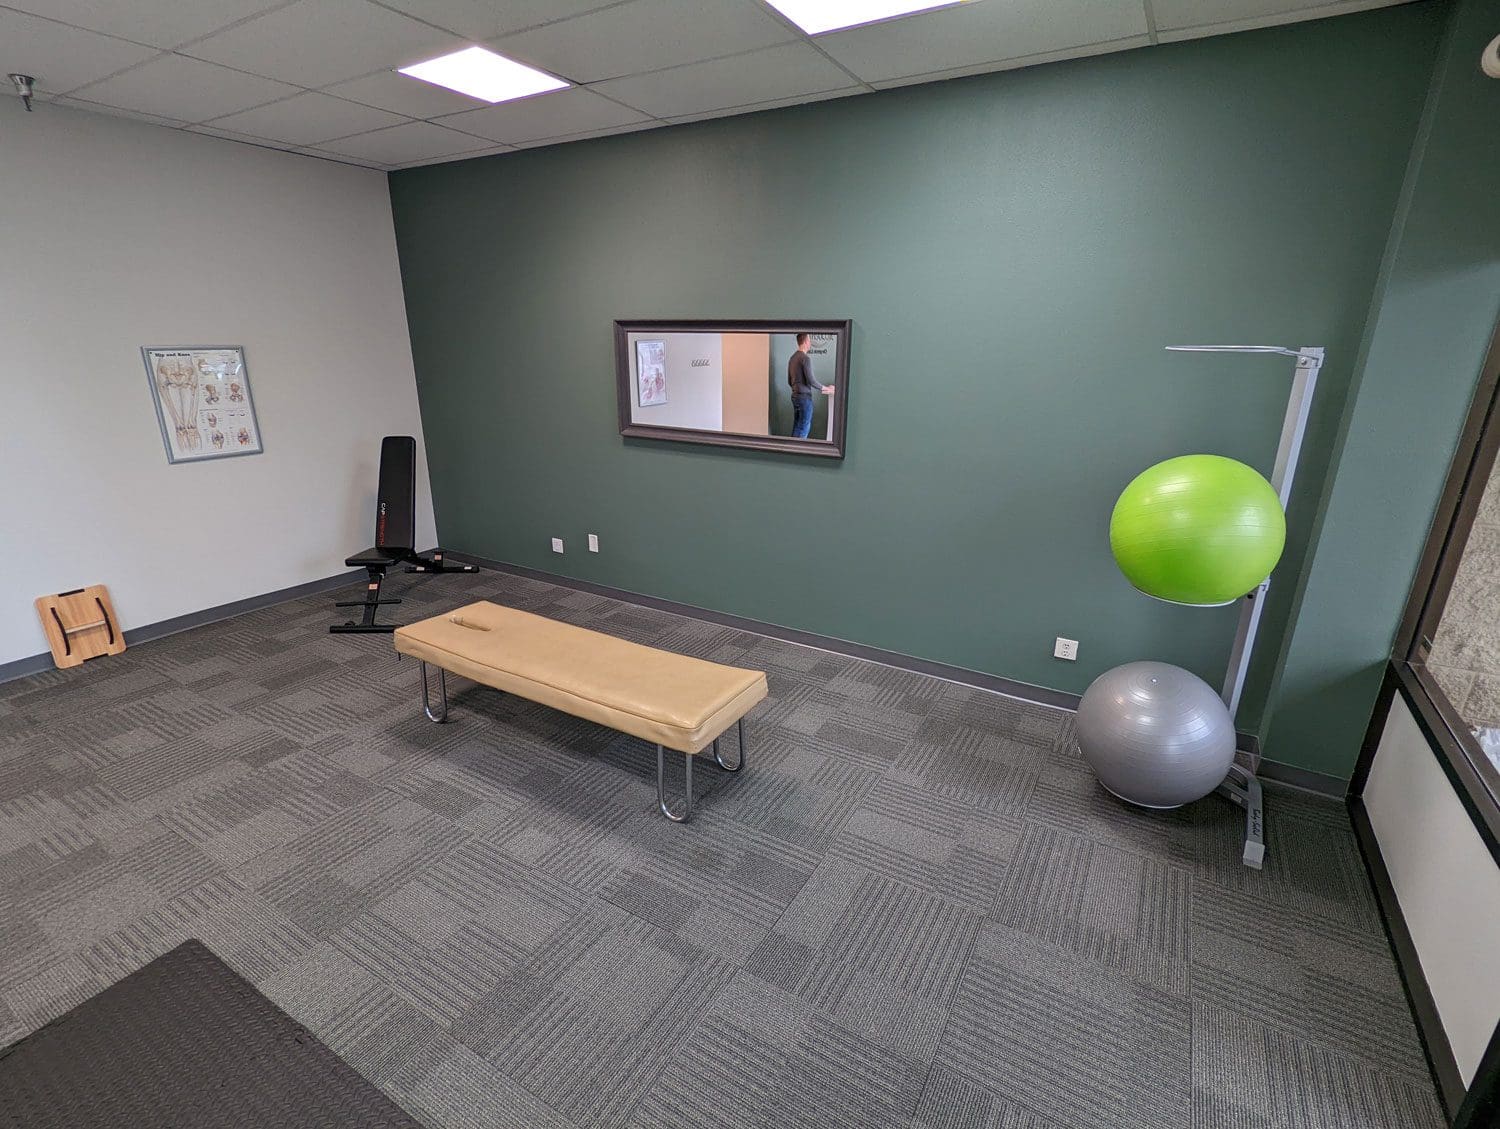 Woodburn Chiropractic rehabilitation treatment room with a large window and lovely green walls.